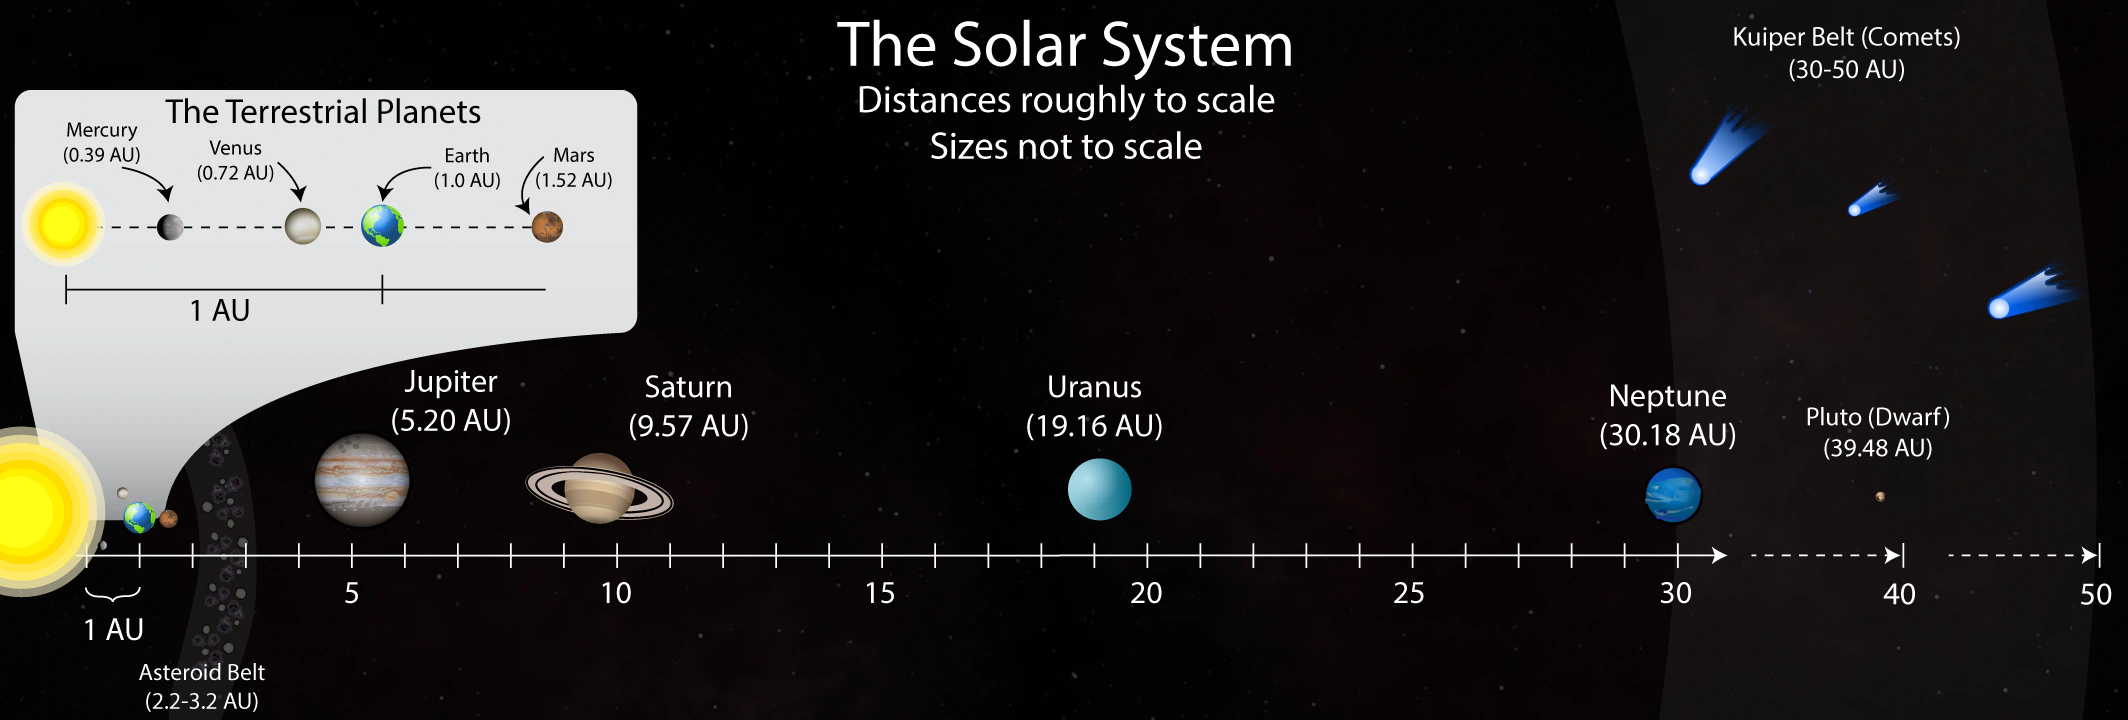 solar system scale 720p